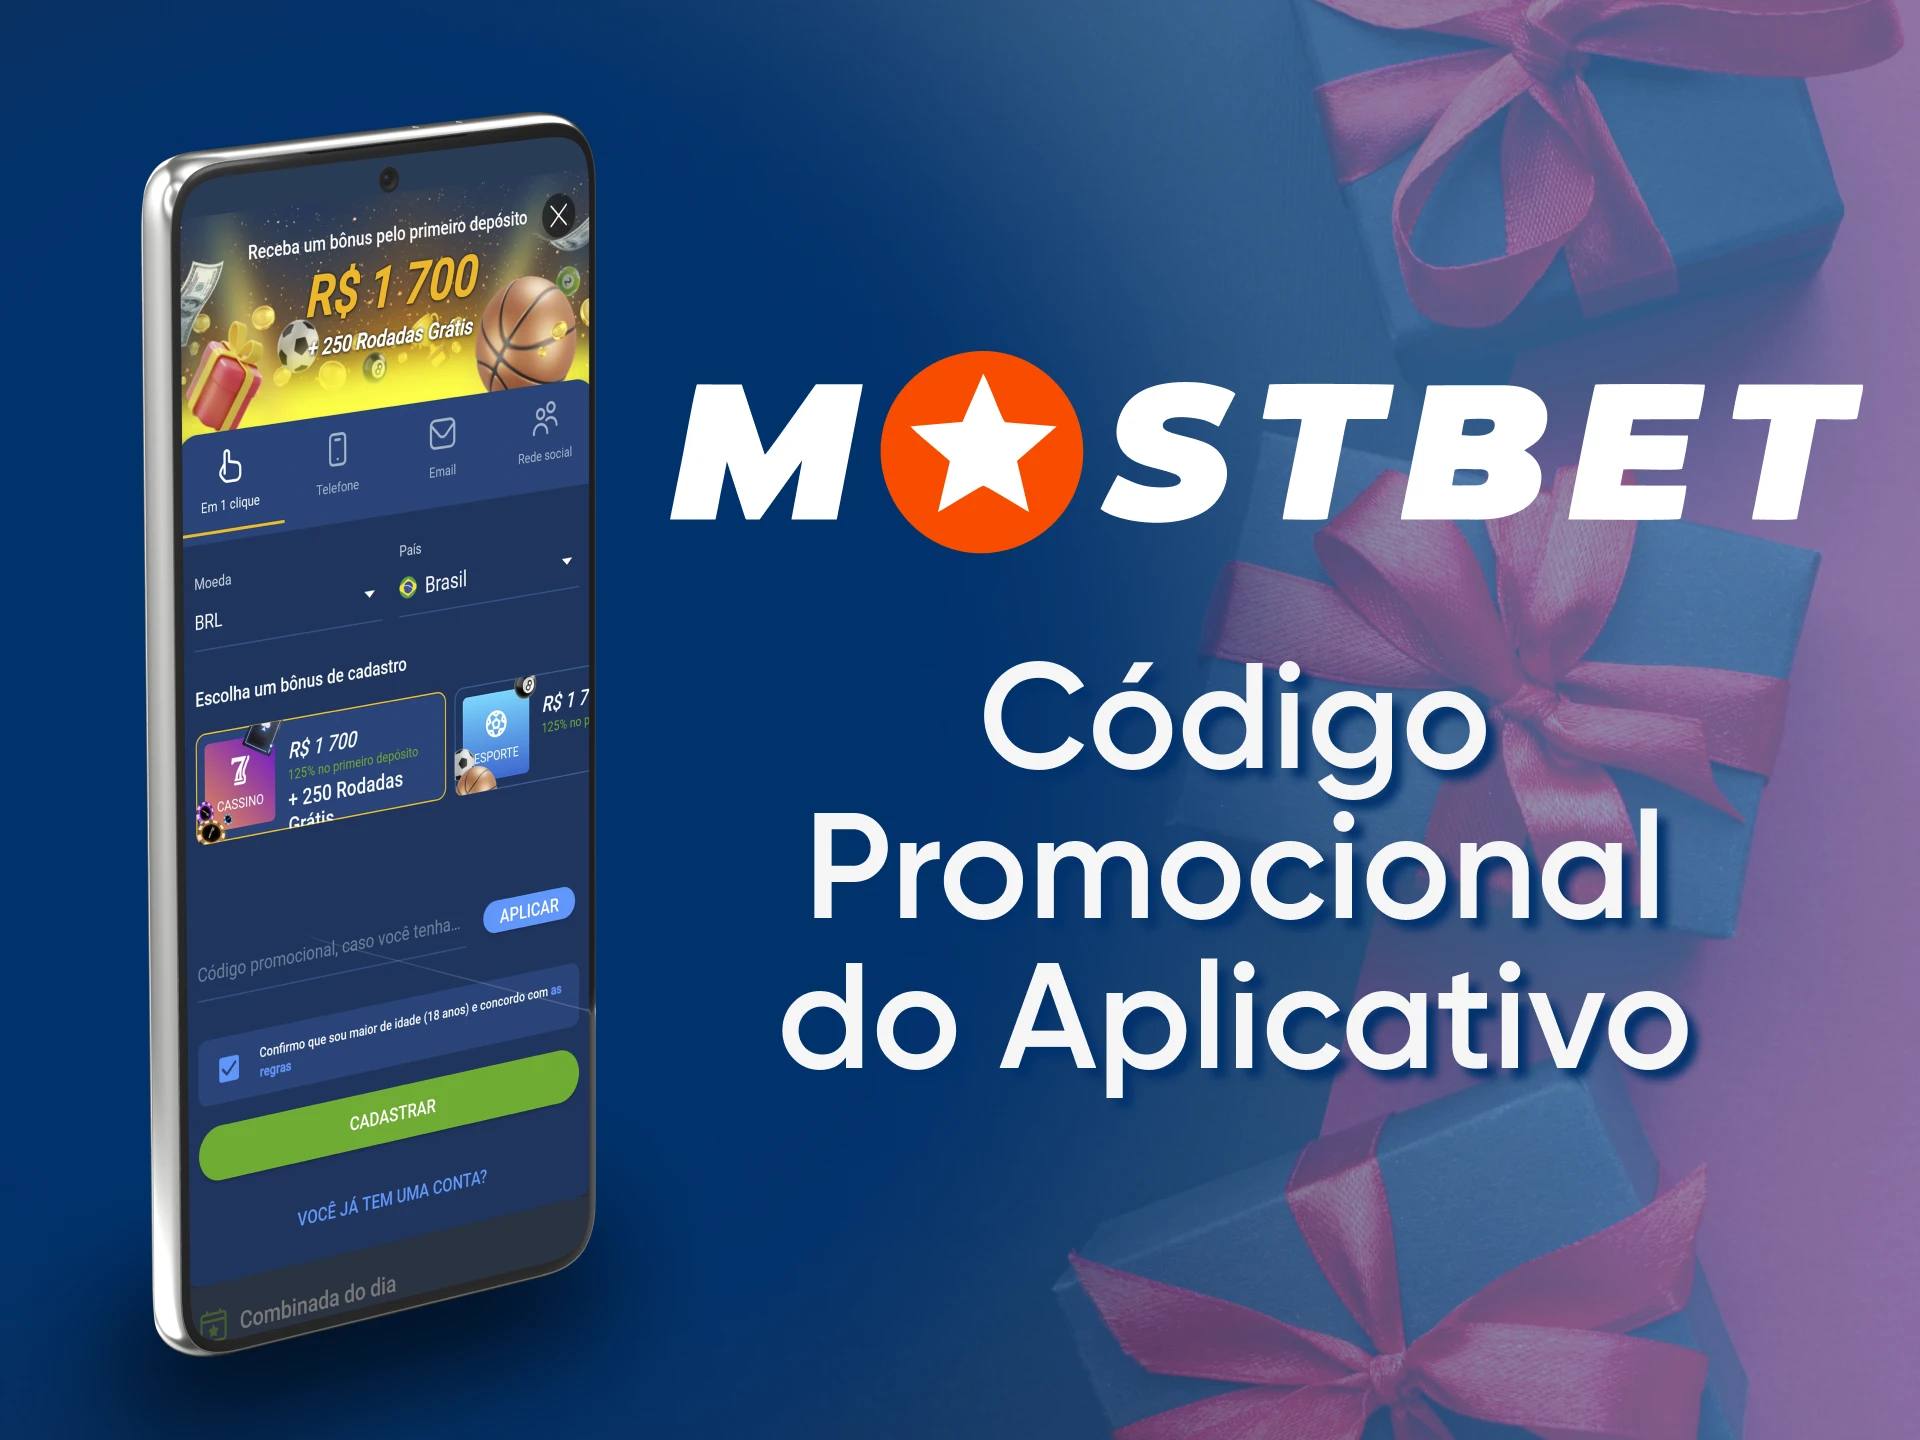 Use the Mostbet promo code and receive good betting bonuses.